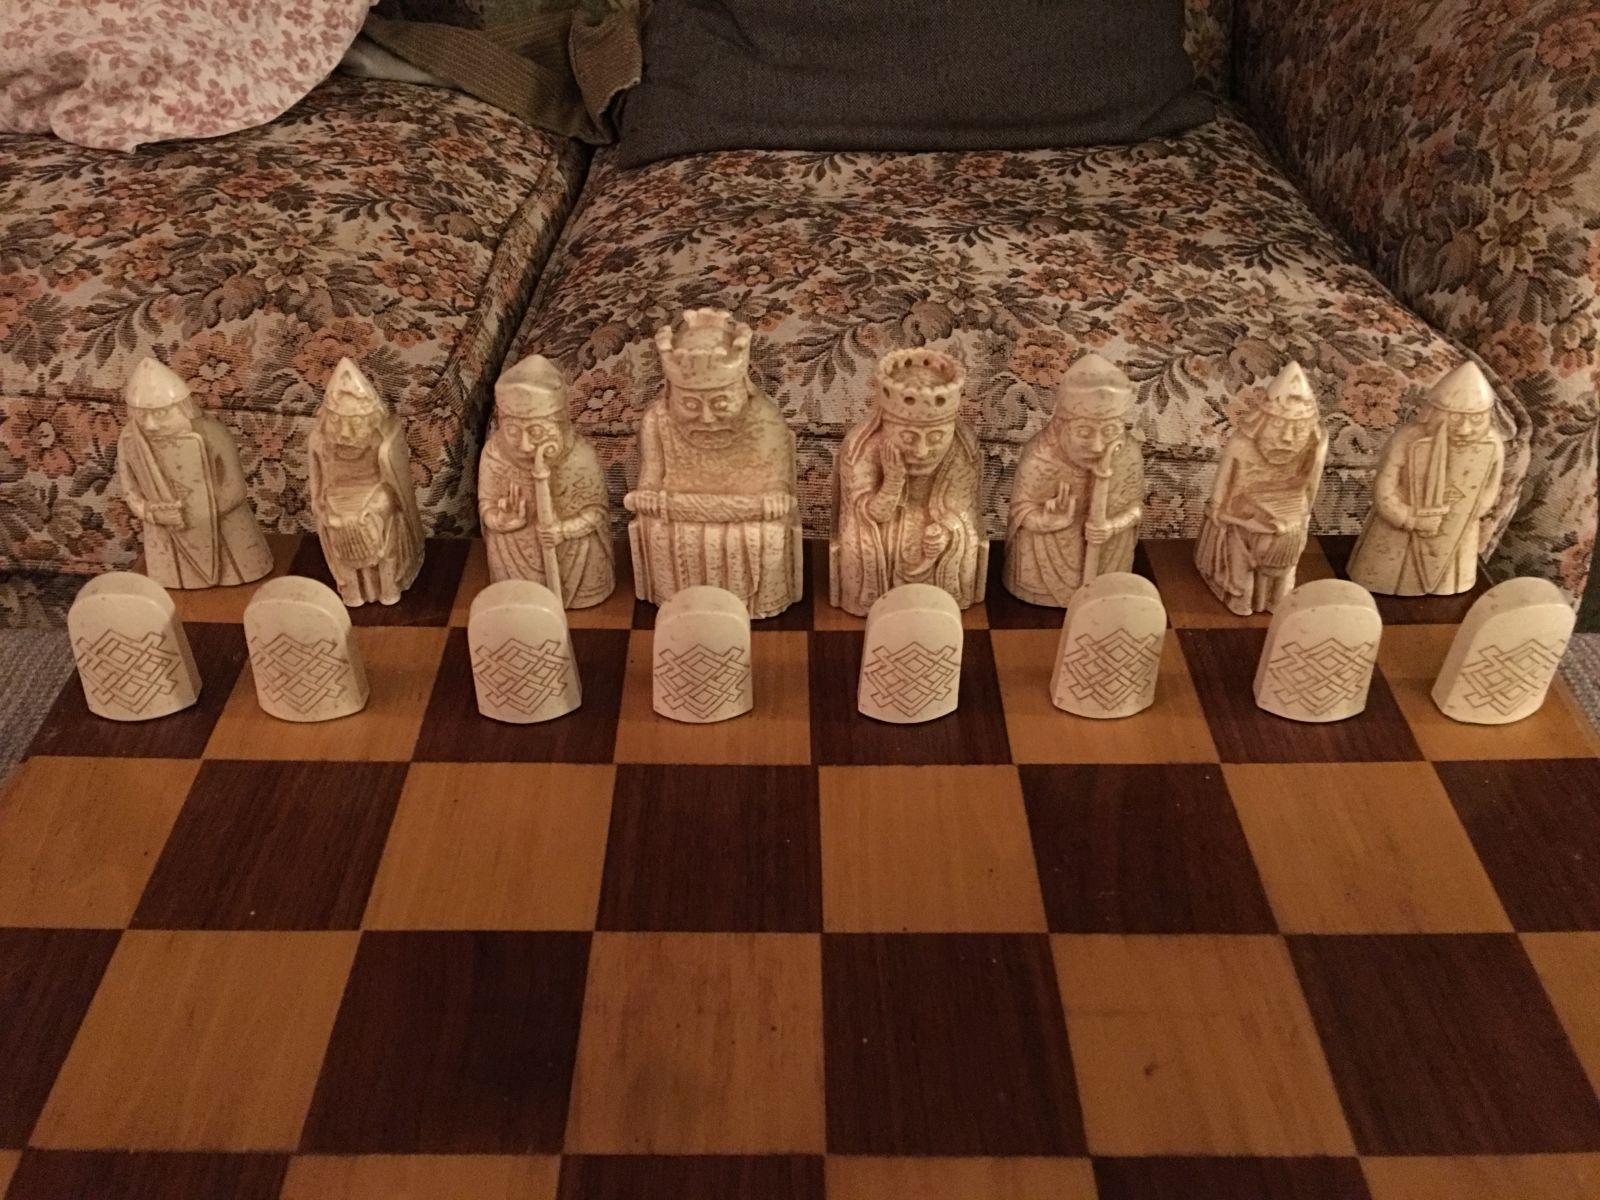 Illustration for article titled Coolest chess set ever!!